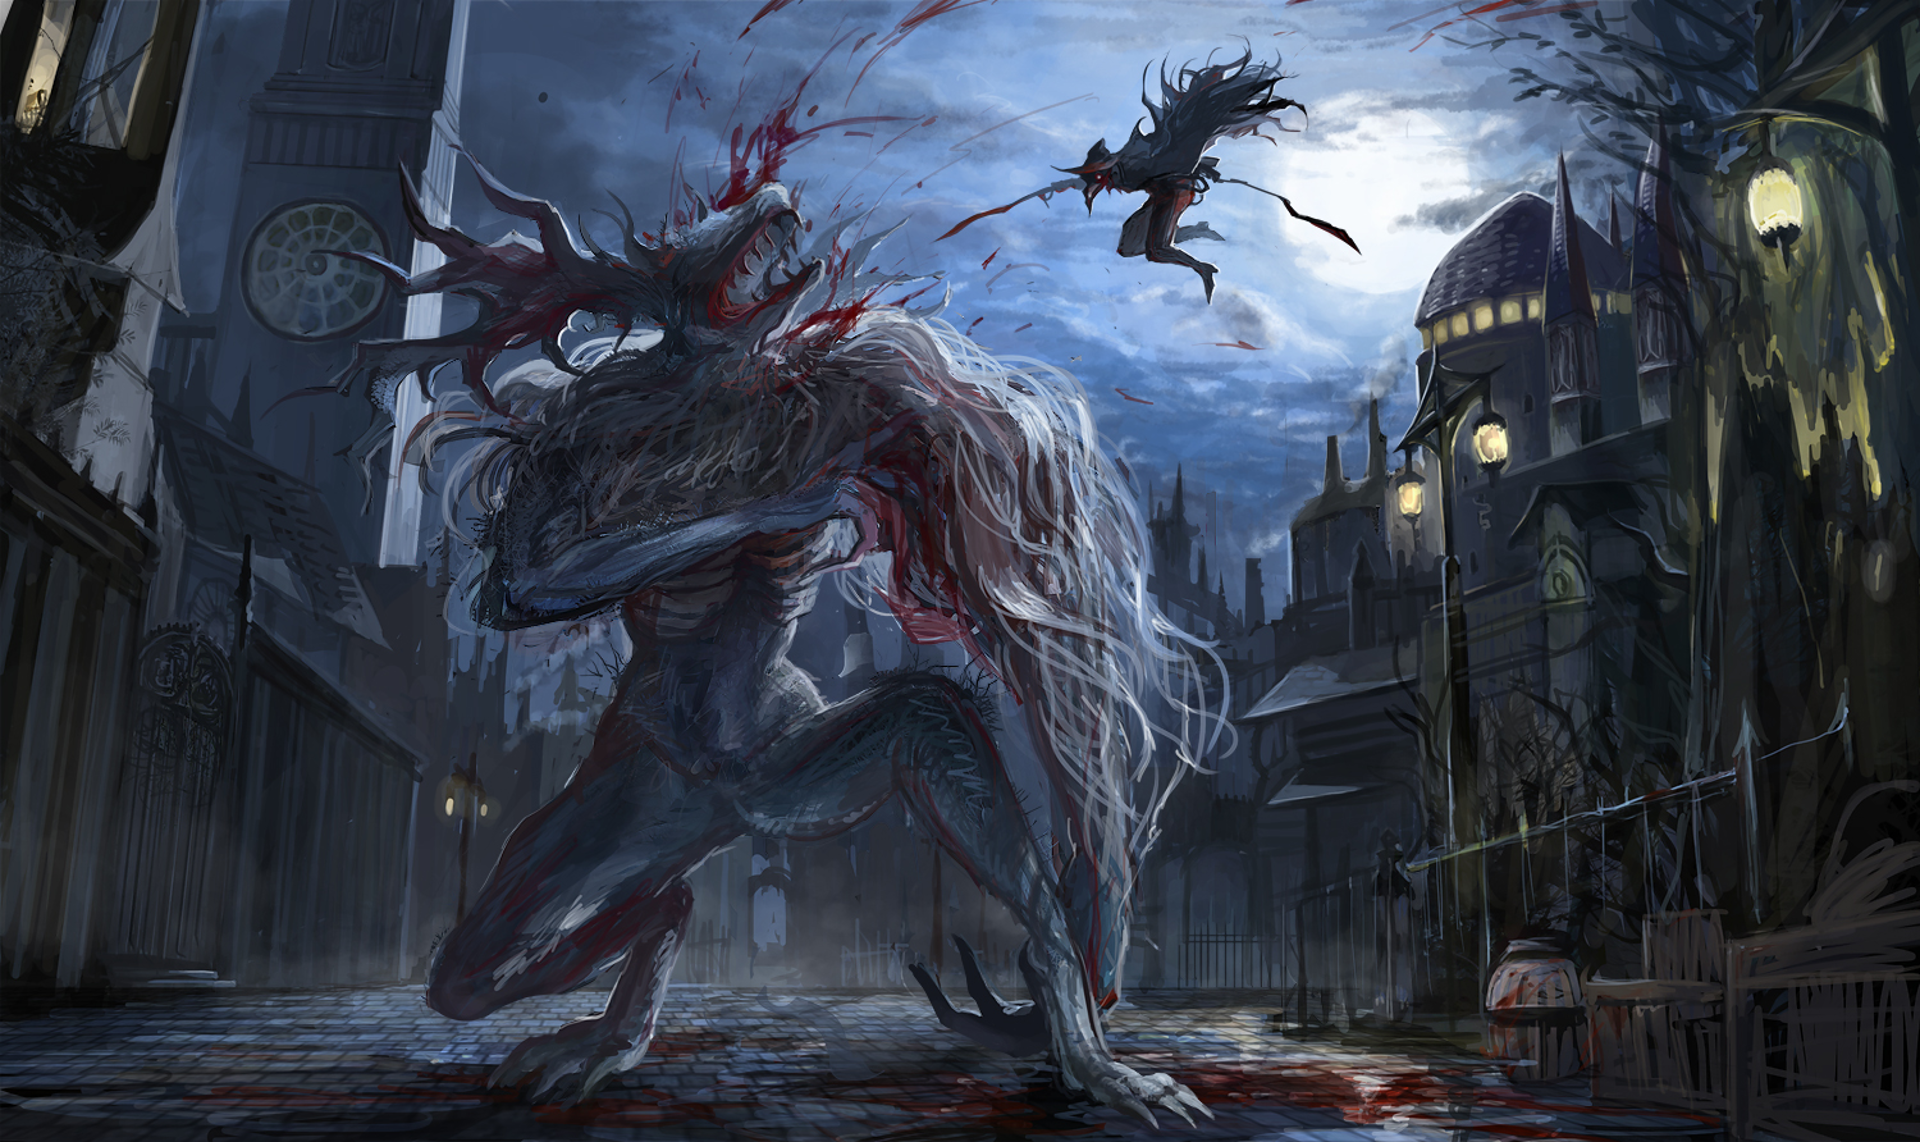 147 Bloodborne Hd Wallpapers Background Images Wallpaper Abyss